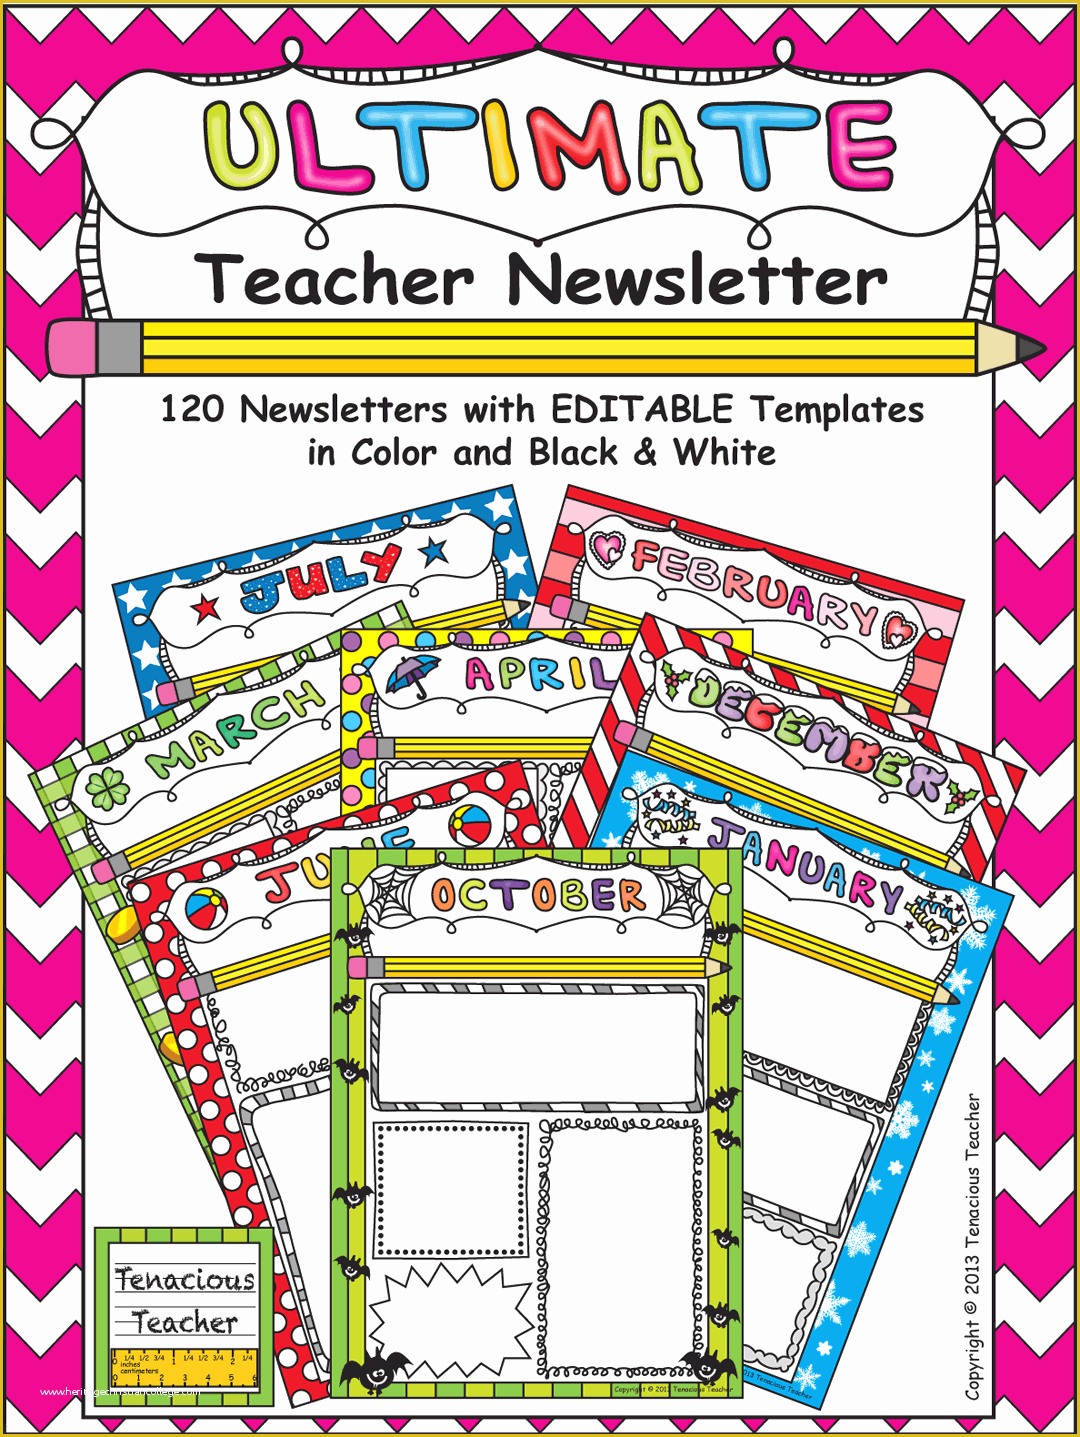 Free Editable Newsletter Templates for Teachers Of Ultimate Teacher Newsletter—120 Color and Black and White